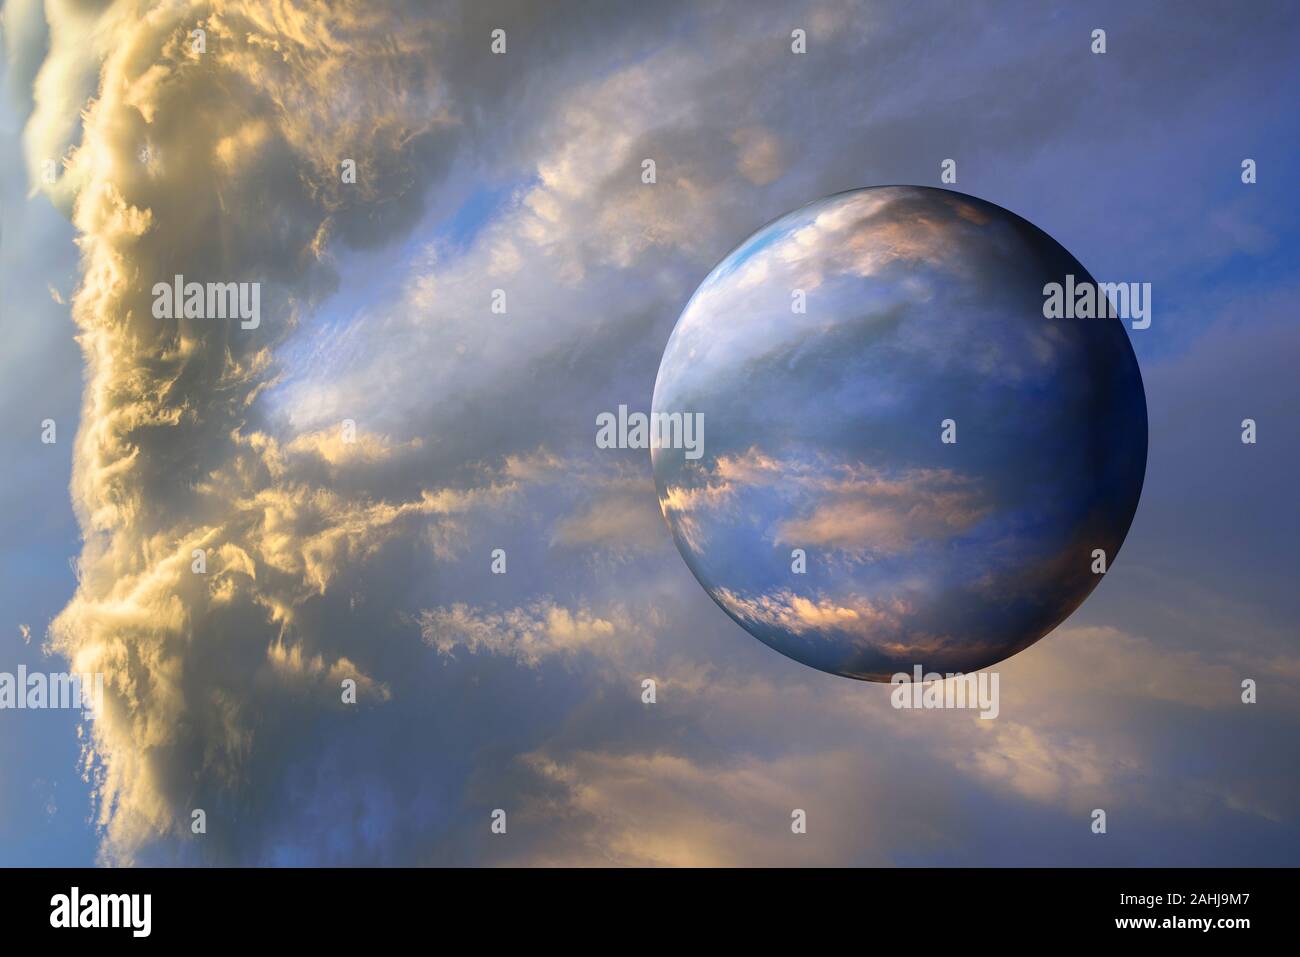 Abstract computer art background image clouds and blue planet Stock Photo